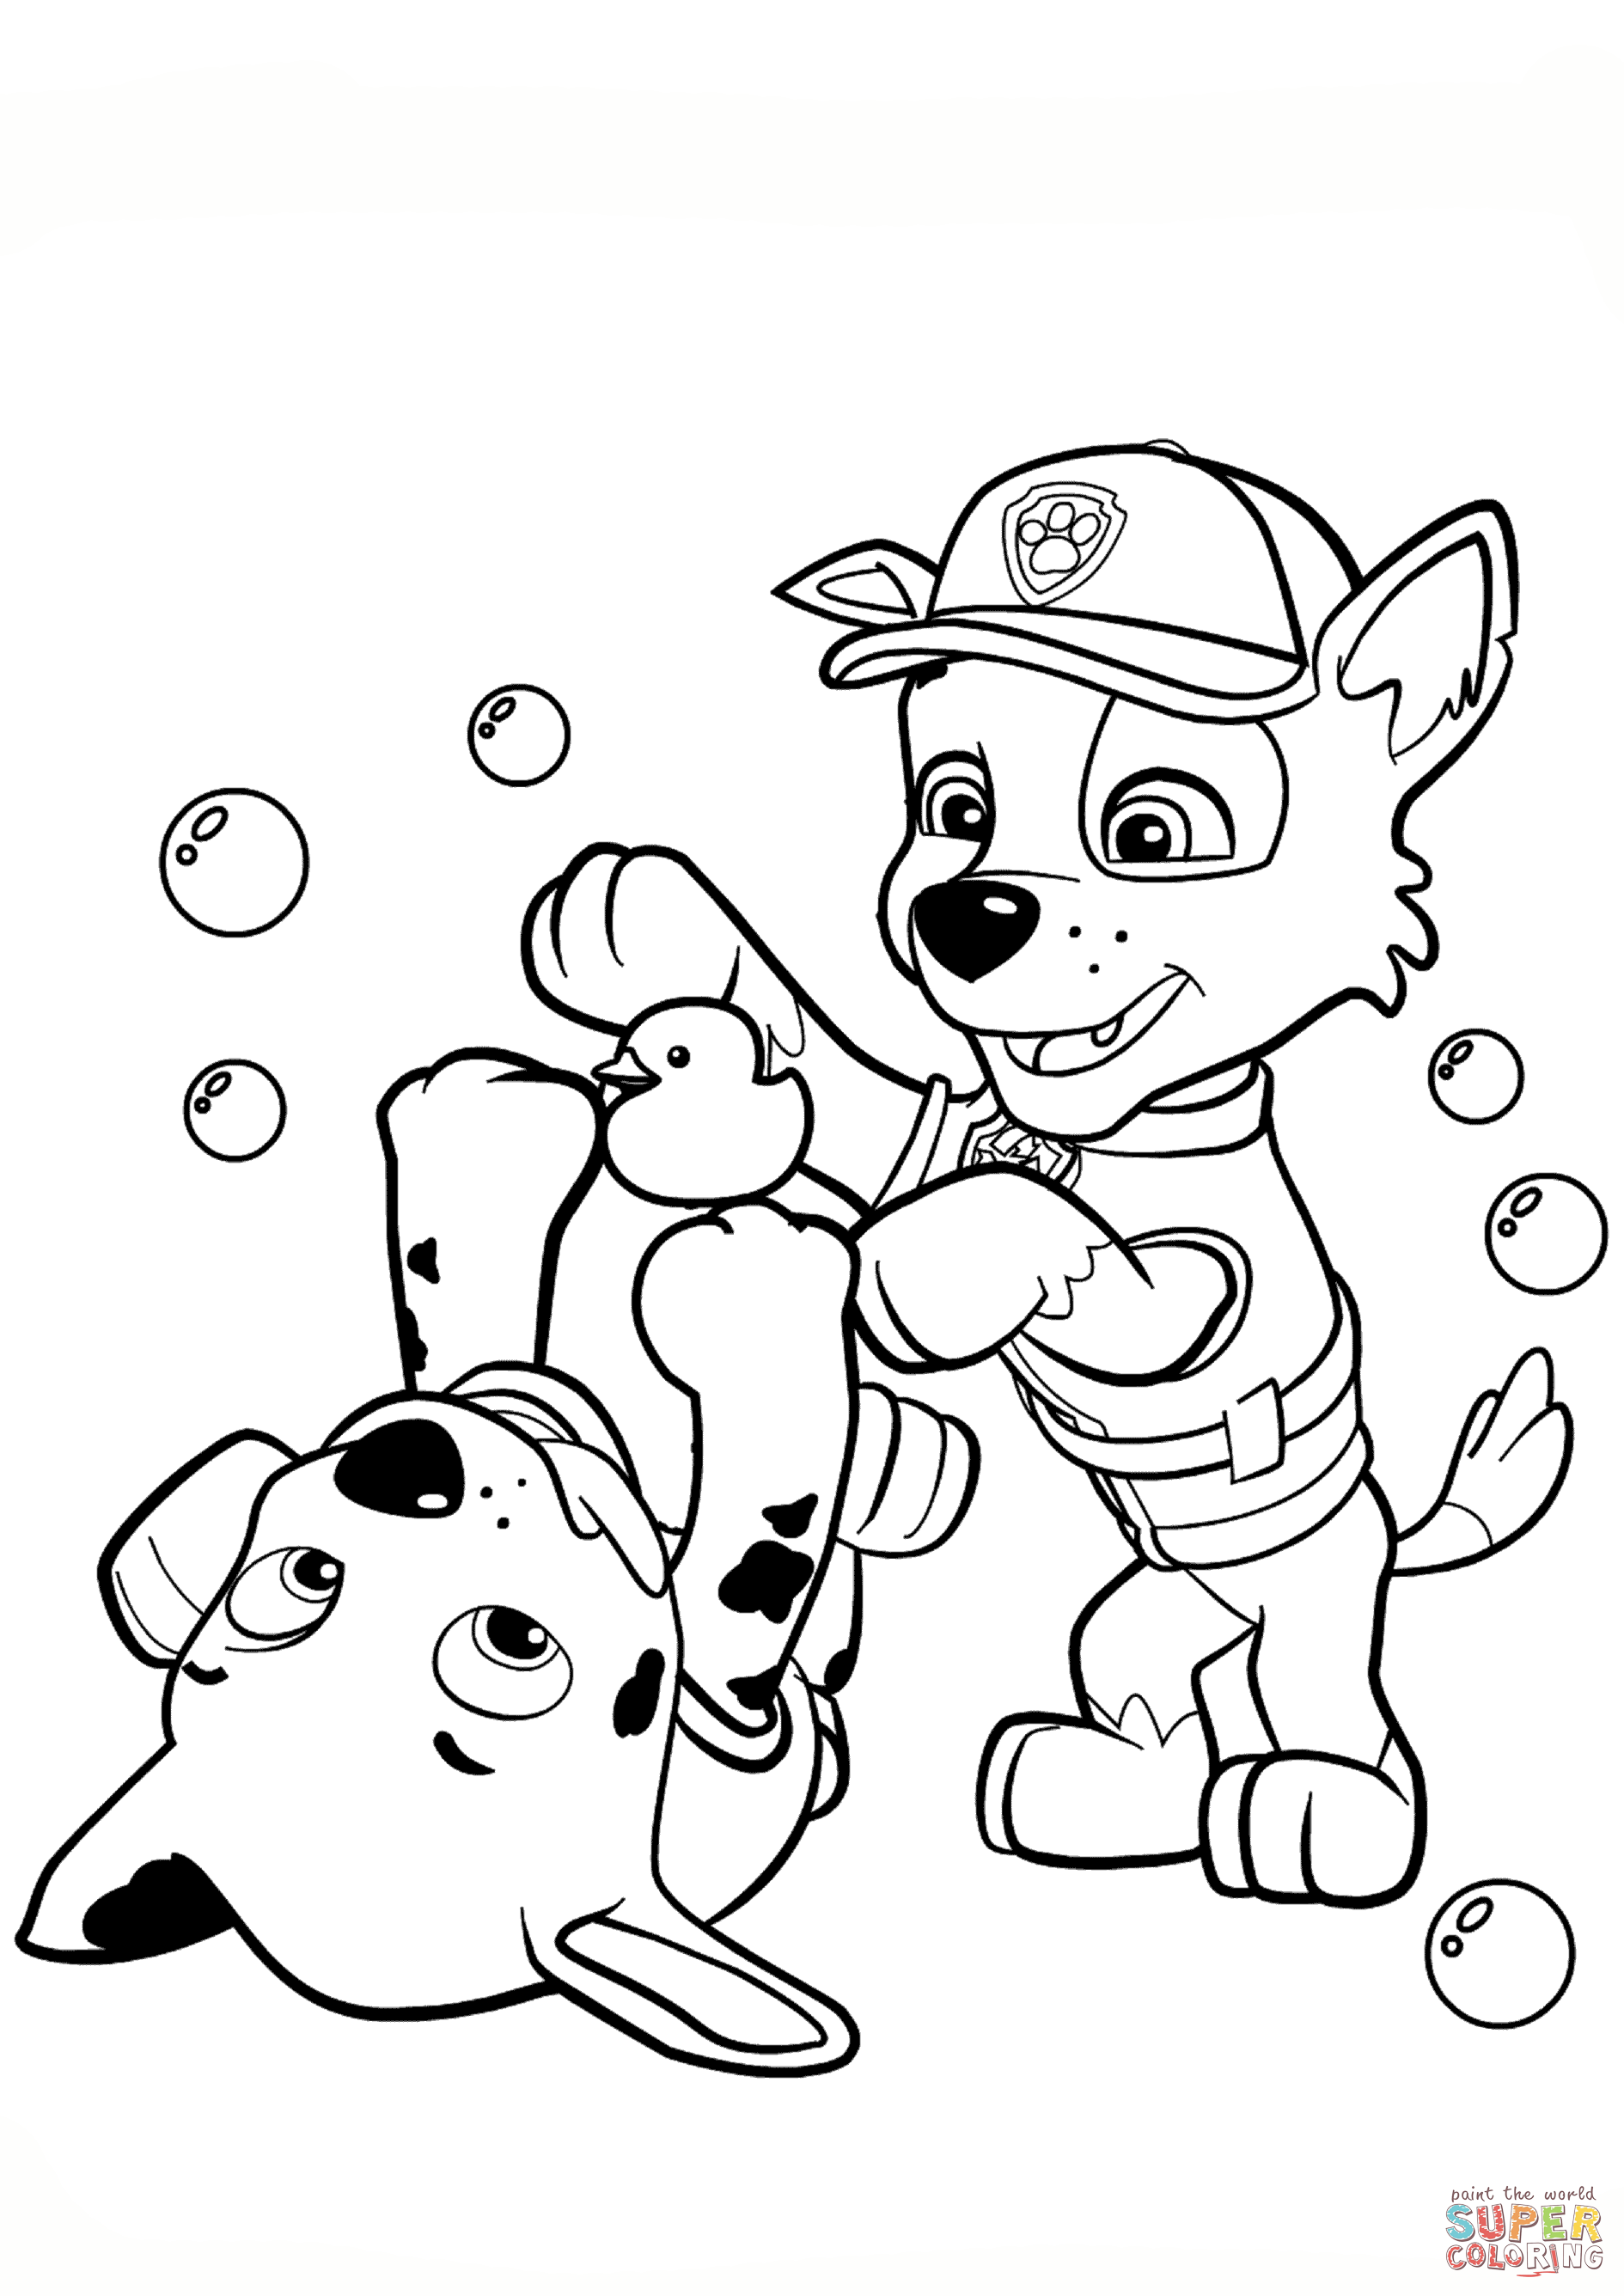 Paw patrol rocky and marshall coloring page free printable coloring pages